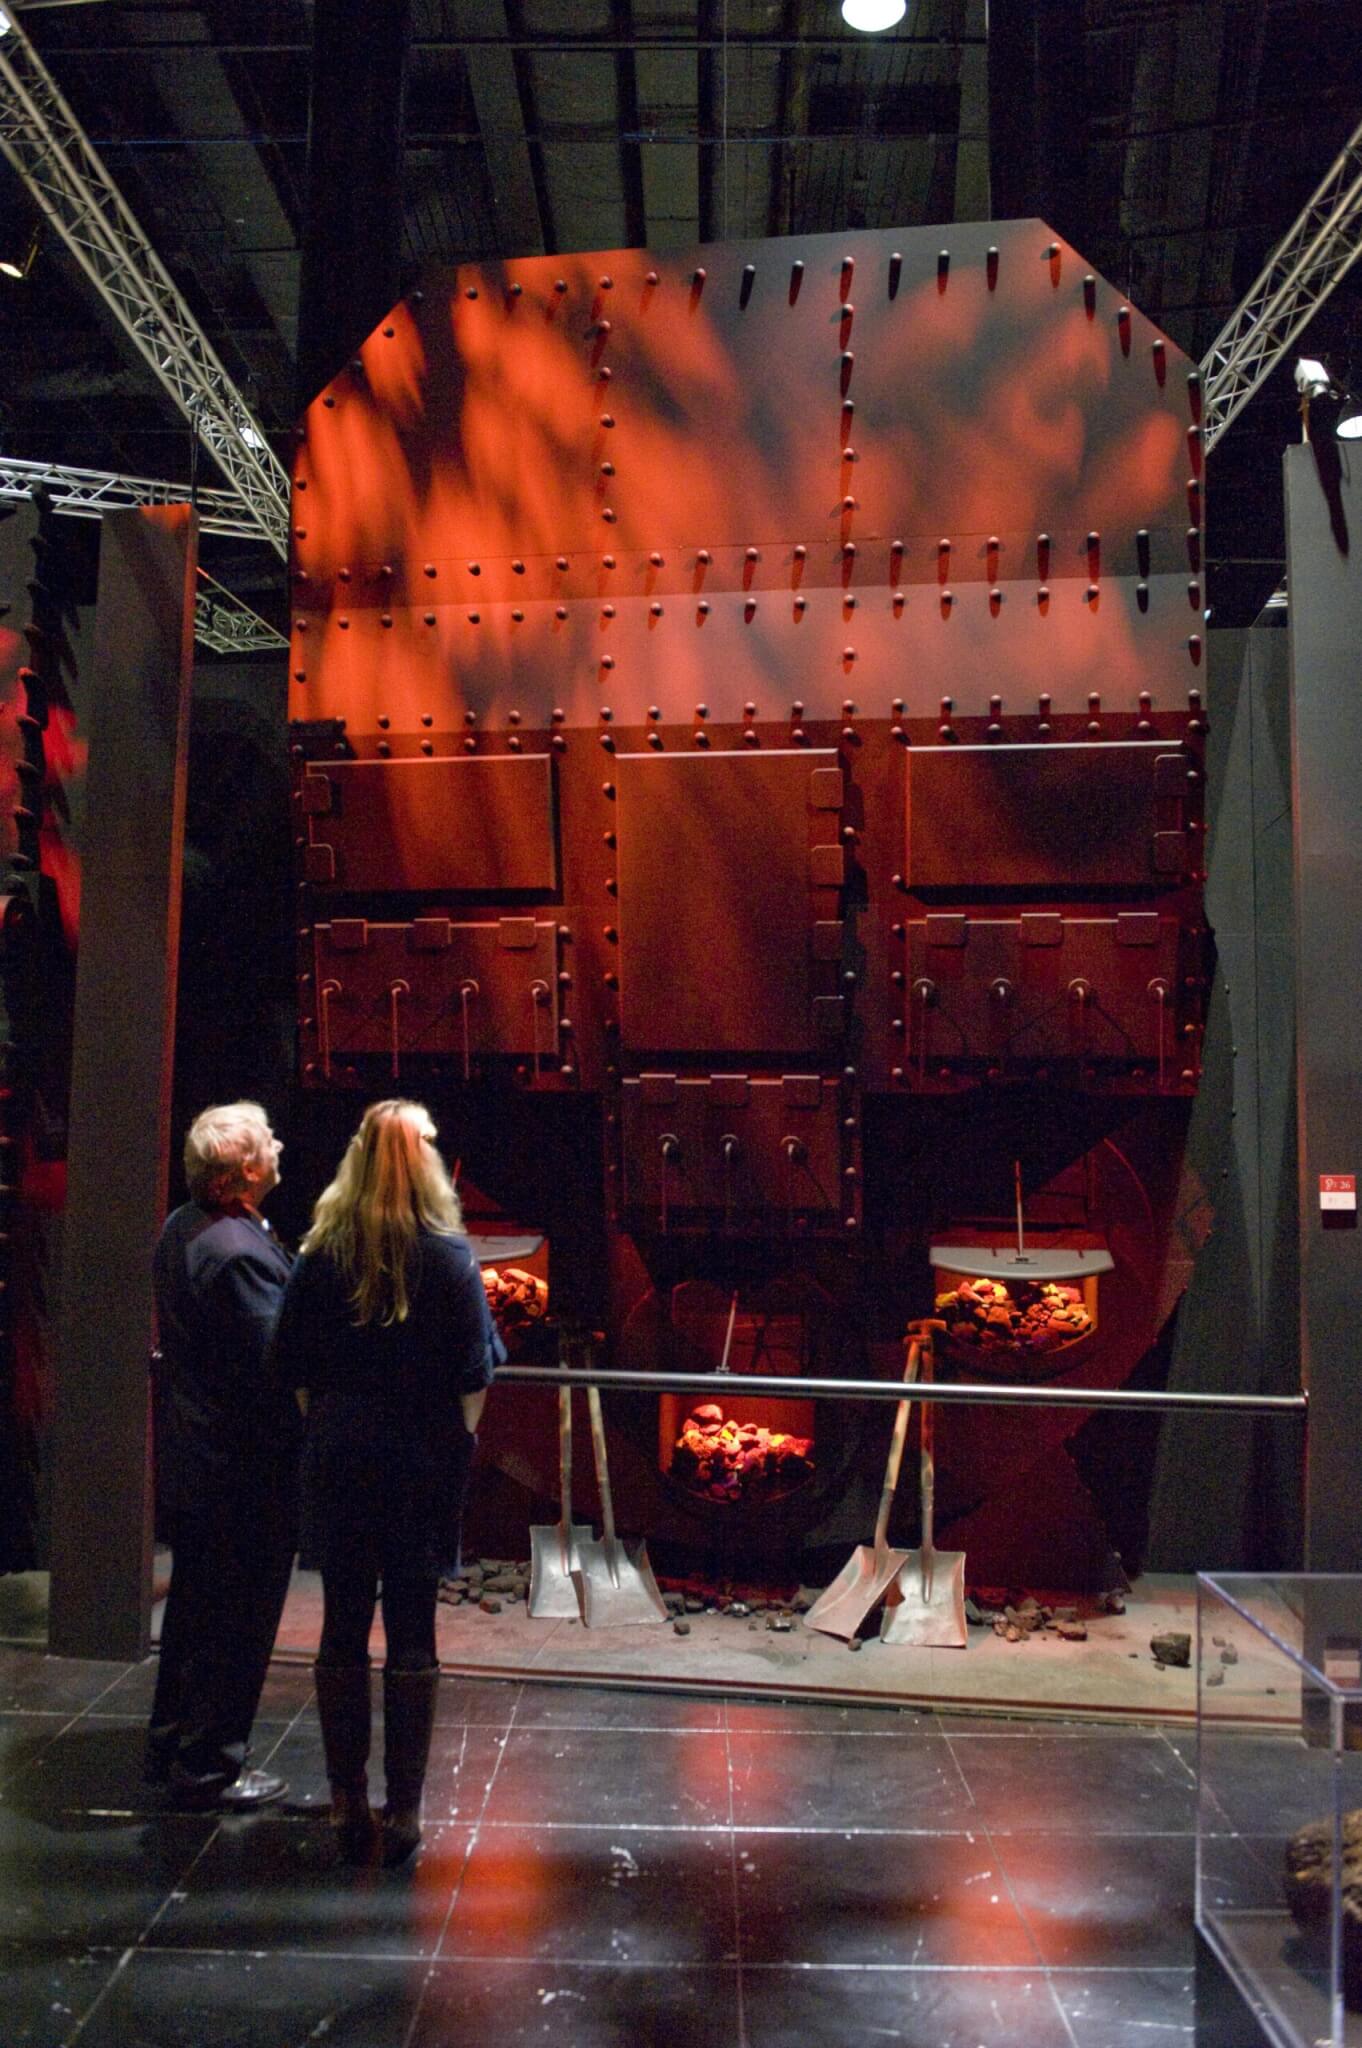 An Exhibition About The Sinking Of Rms Titanic Opens At The O2 Bubble. Boiler Room Picture By Glenn Copus 